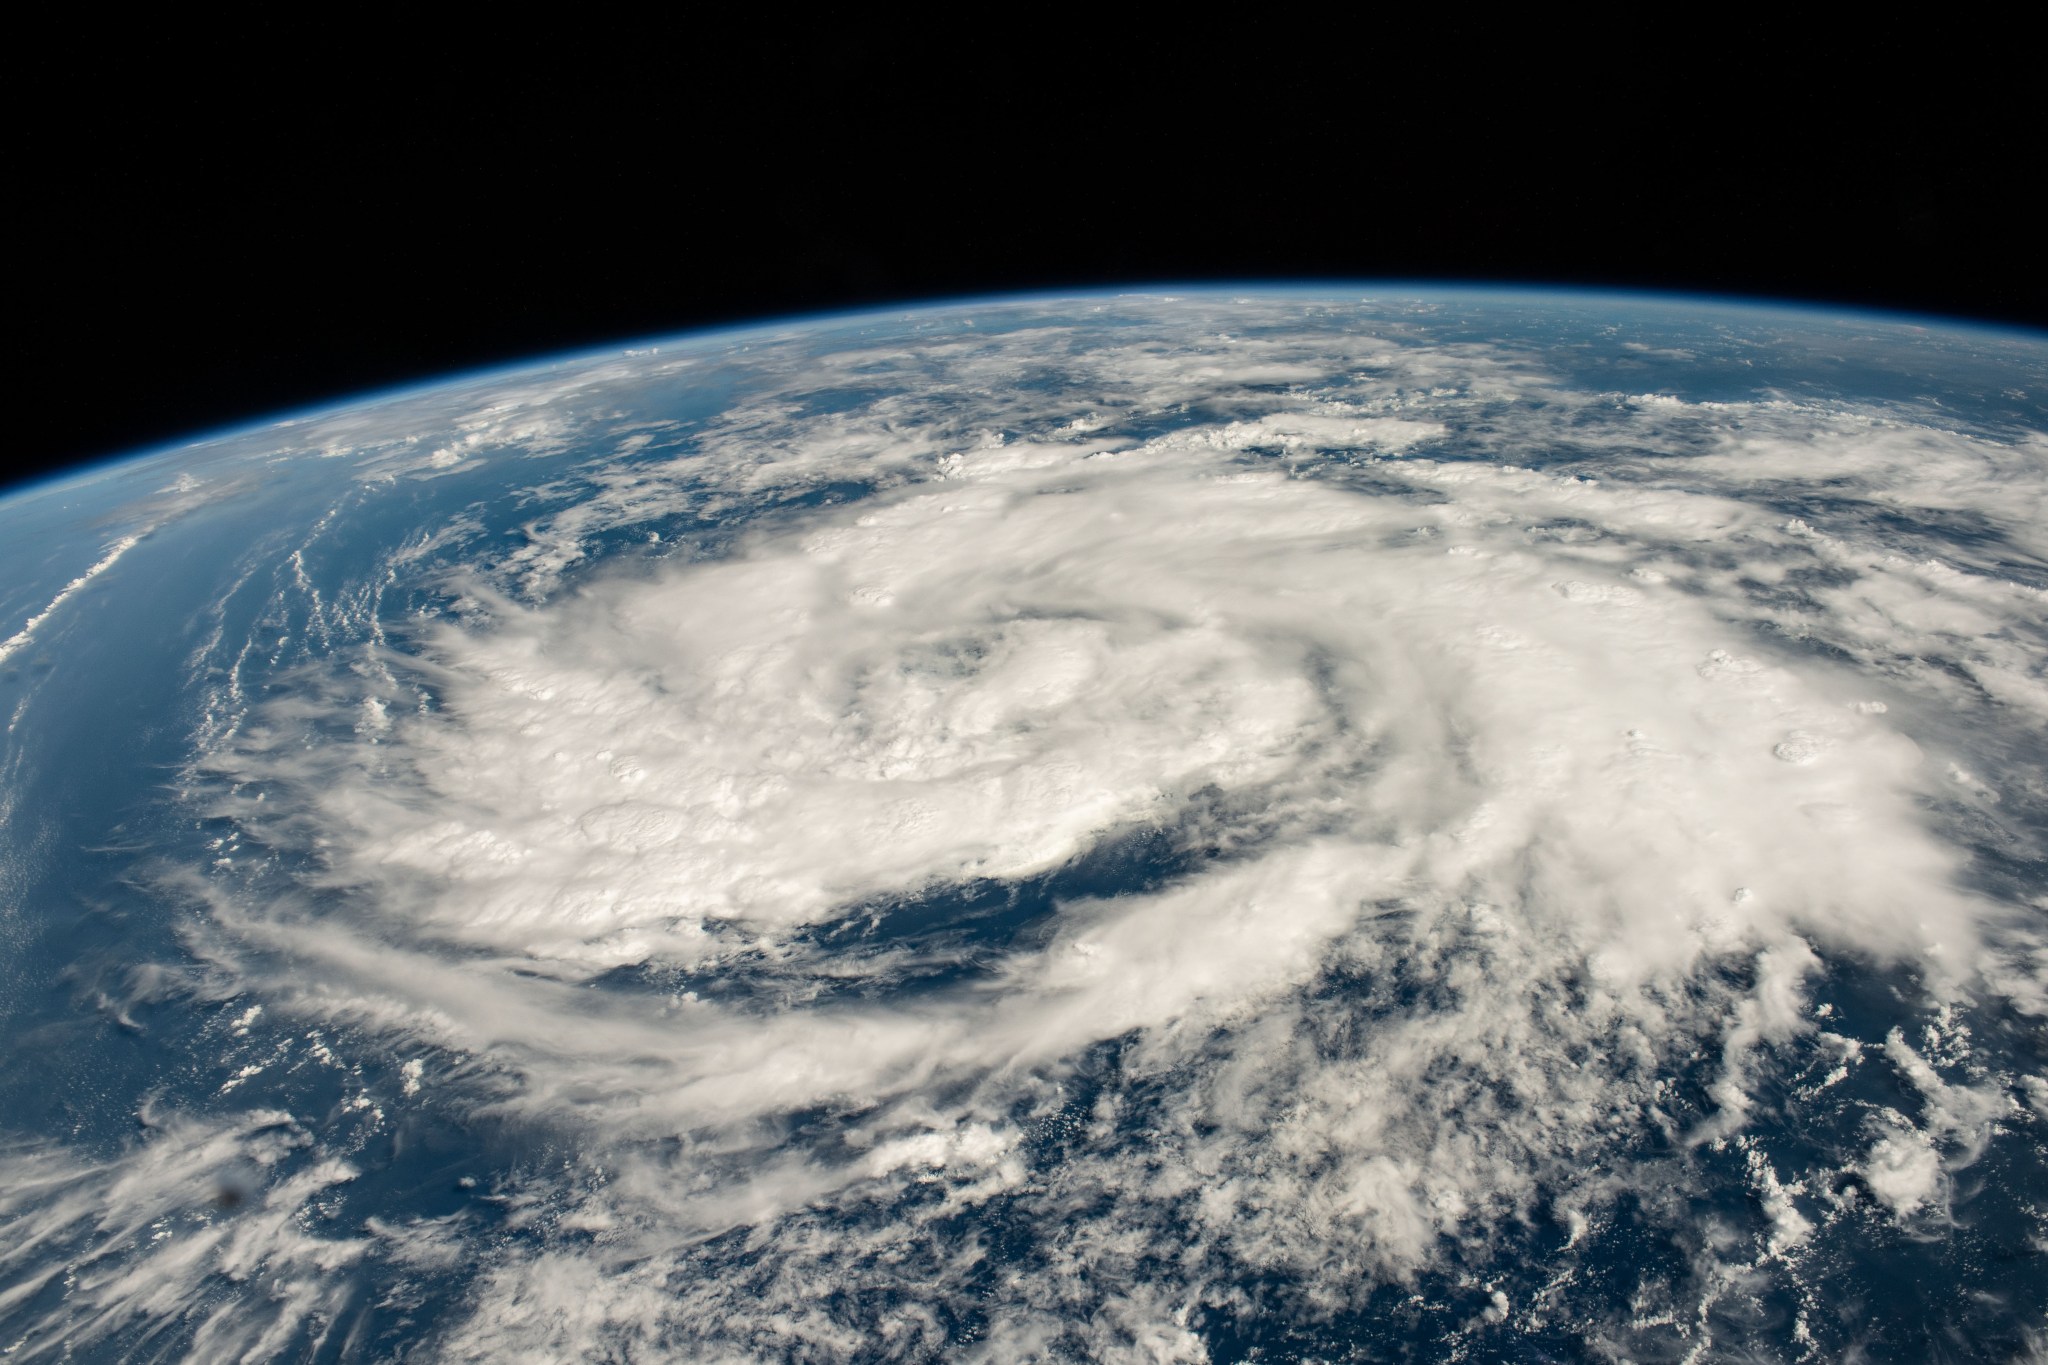 A storm, seen as massive, swirling white clouds dominates this image of Earth from the International Space Station. Peeking out from underneath the clouds and at the storm's edges is the deep blue of the Arabian Sea. In the background (top of image) is the curve of Earth, bordered by the darkness of space.